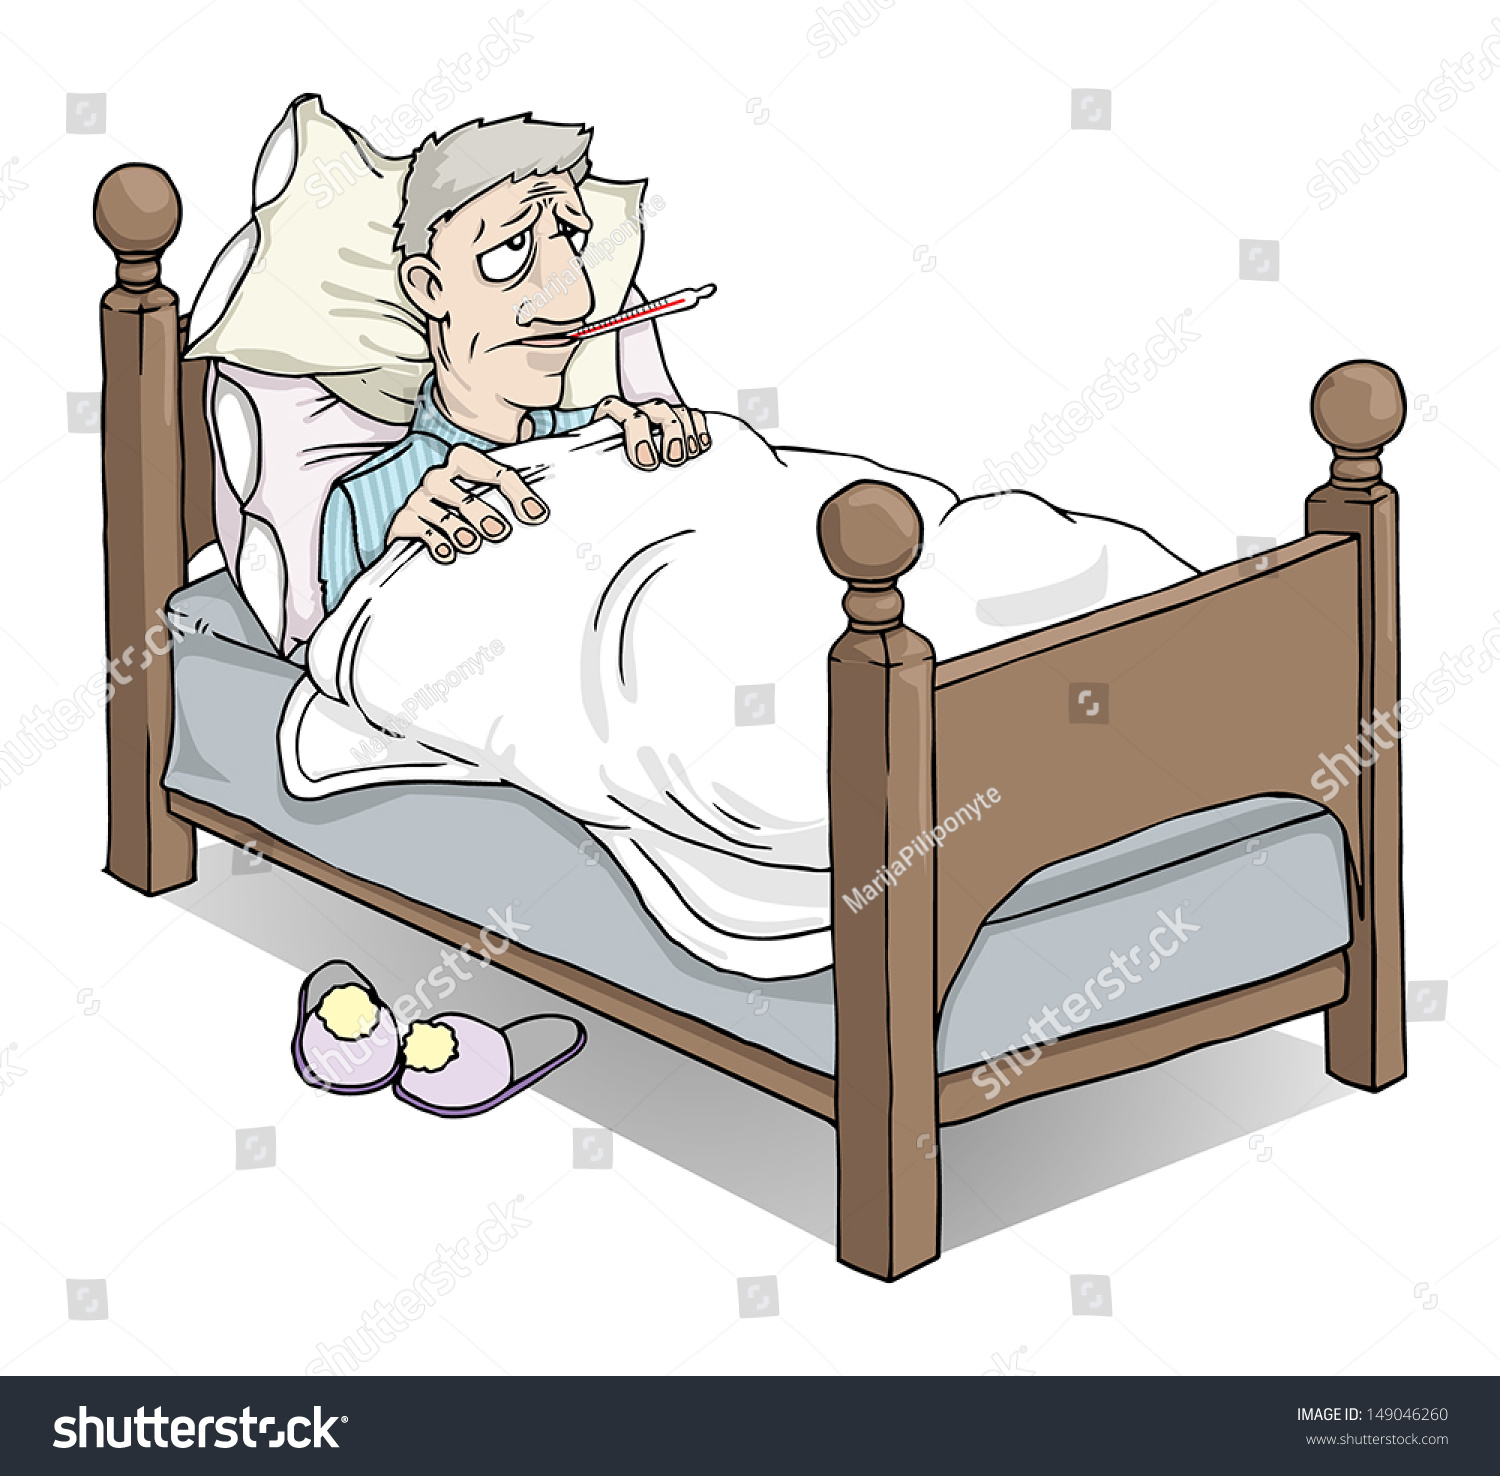 clipart man in bed - photo #37